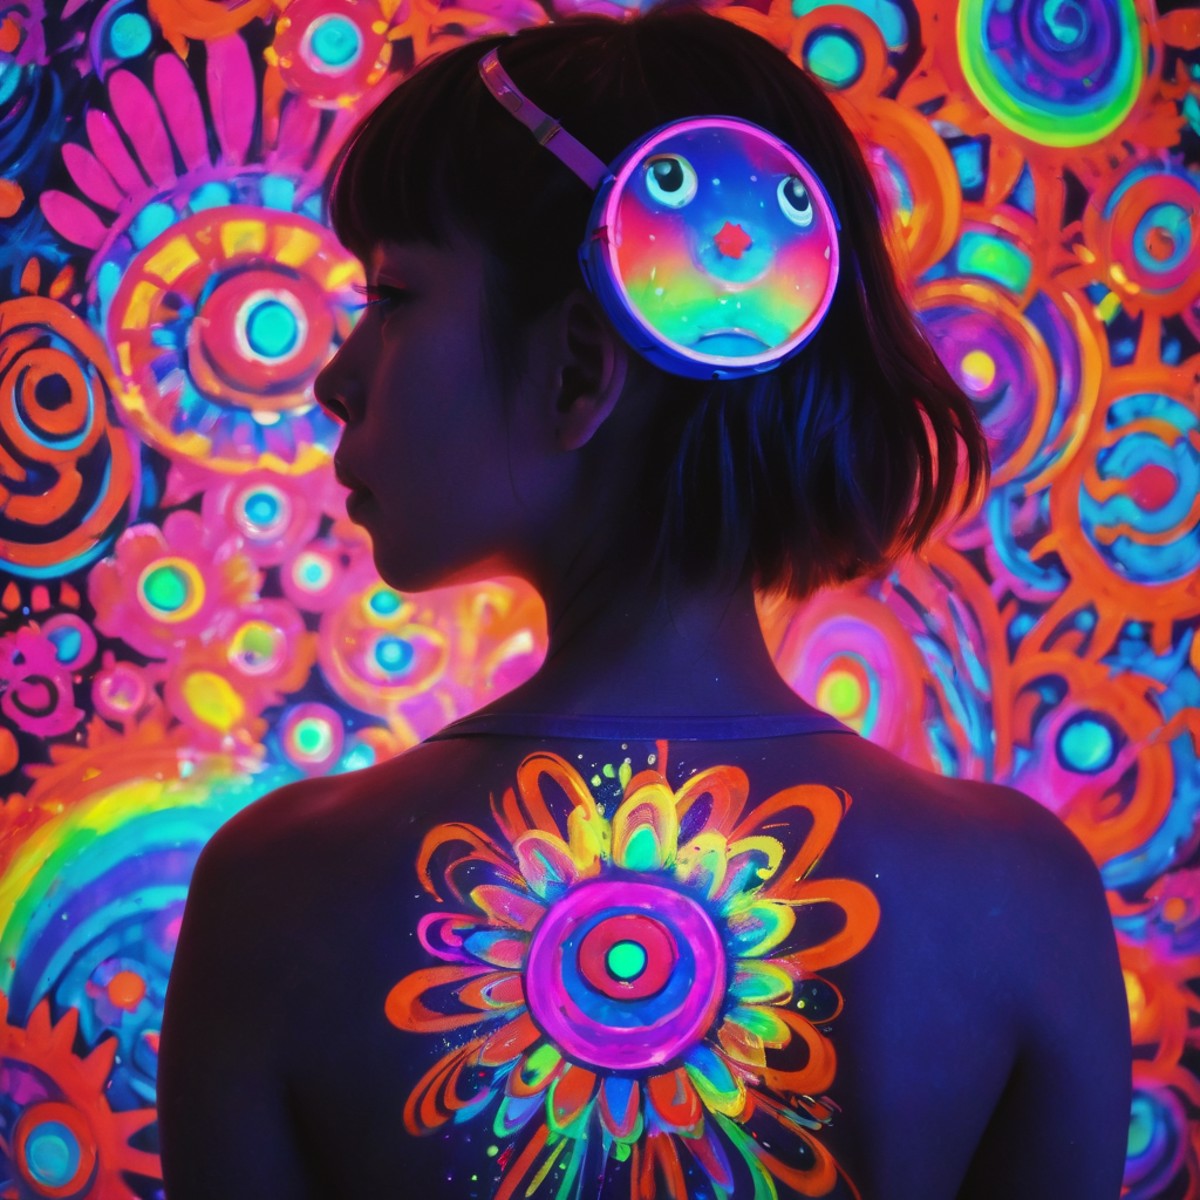 blacklight uv painted on the back of a girl depicting art in the style of Takashi Murakami